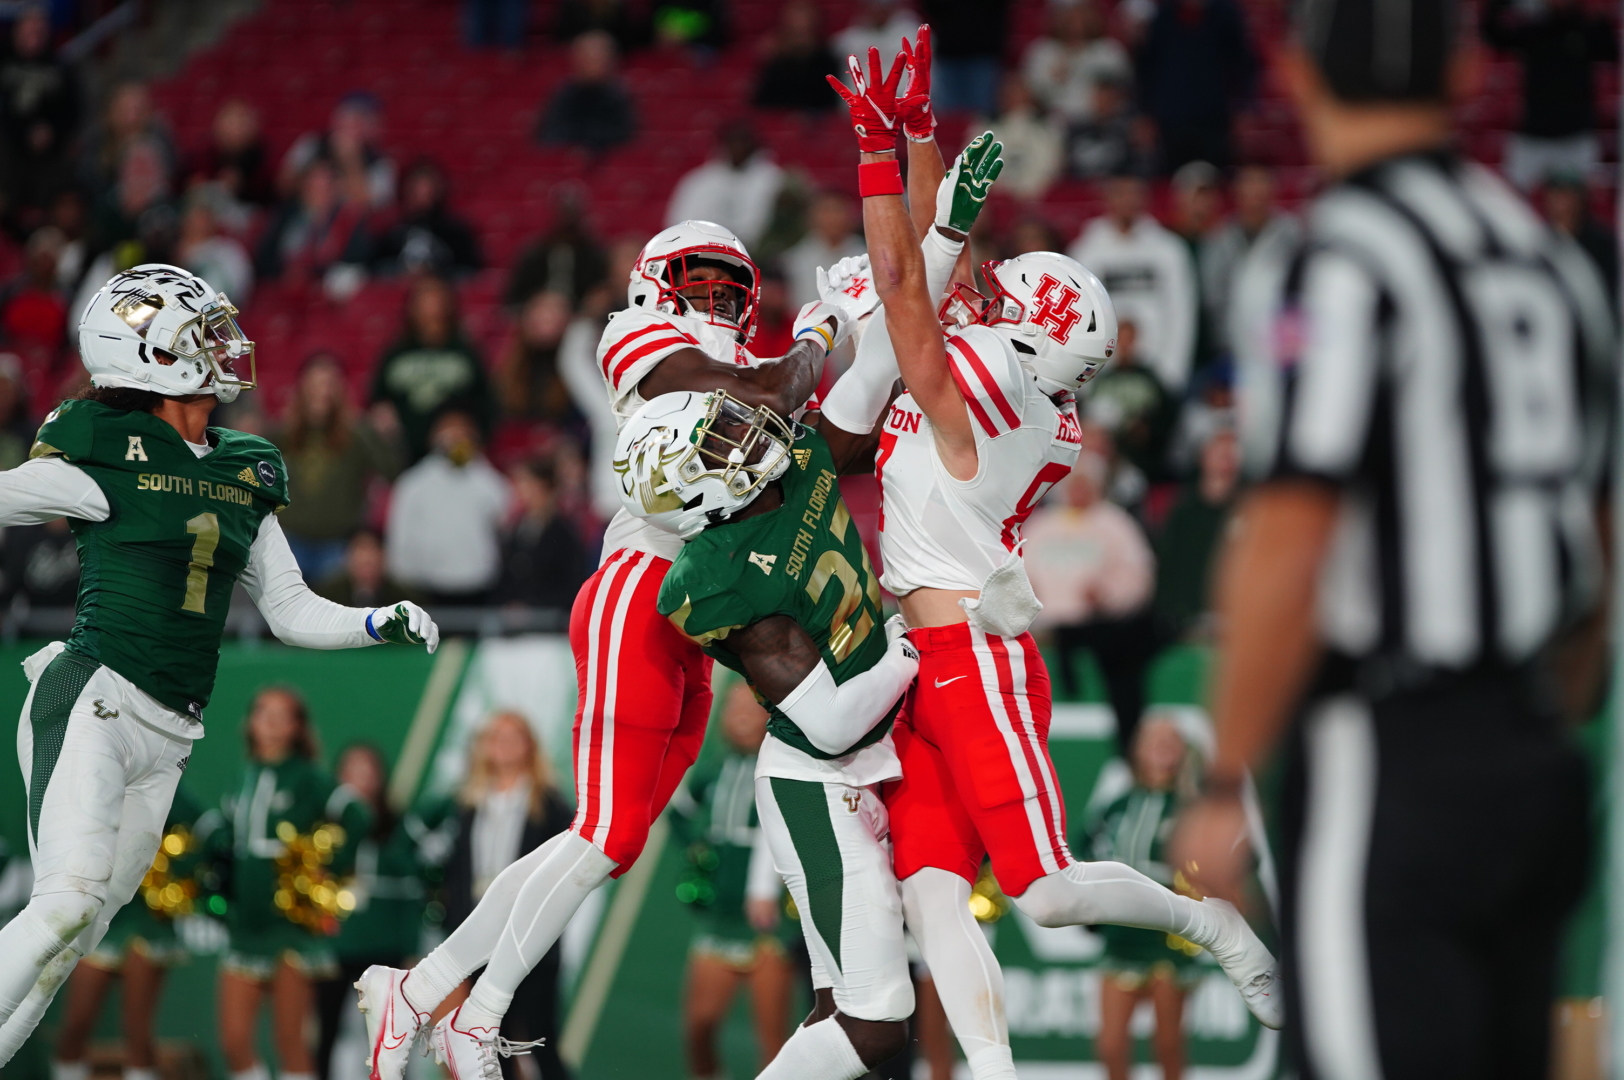 Senior wide receiver Jake Herslow somehow came down with this ball in the back of the end zone for the first Cougars touchdown of the night against USF. | Courtesy of UH athletics